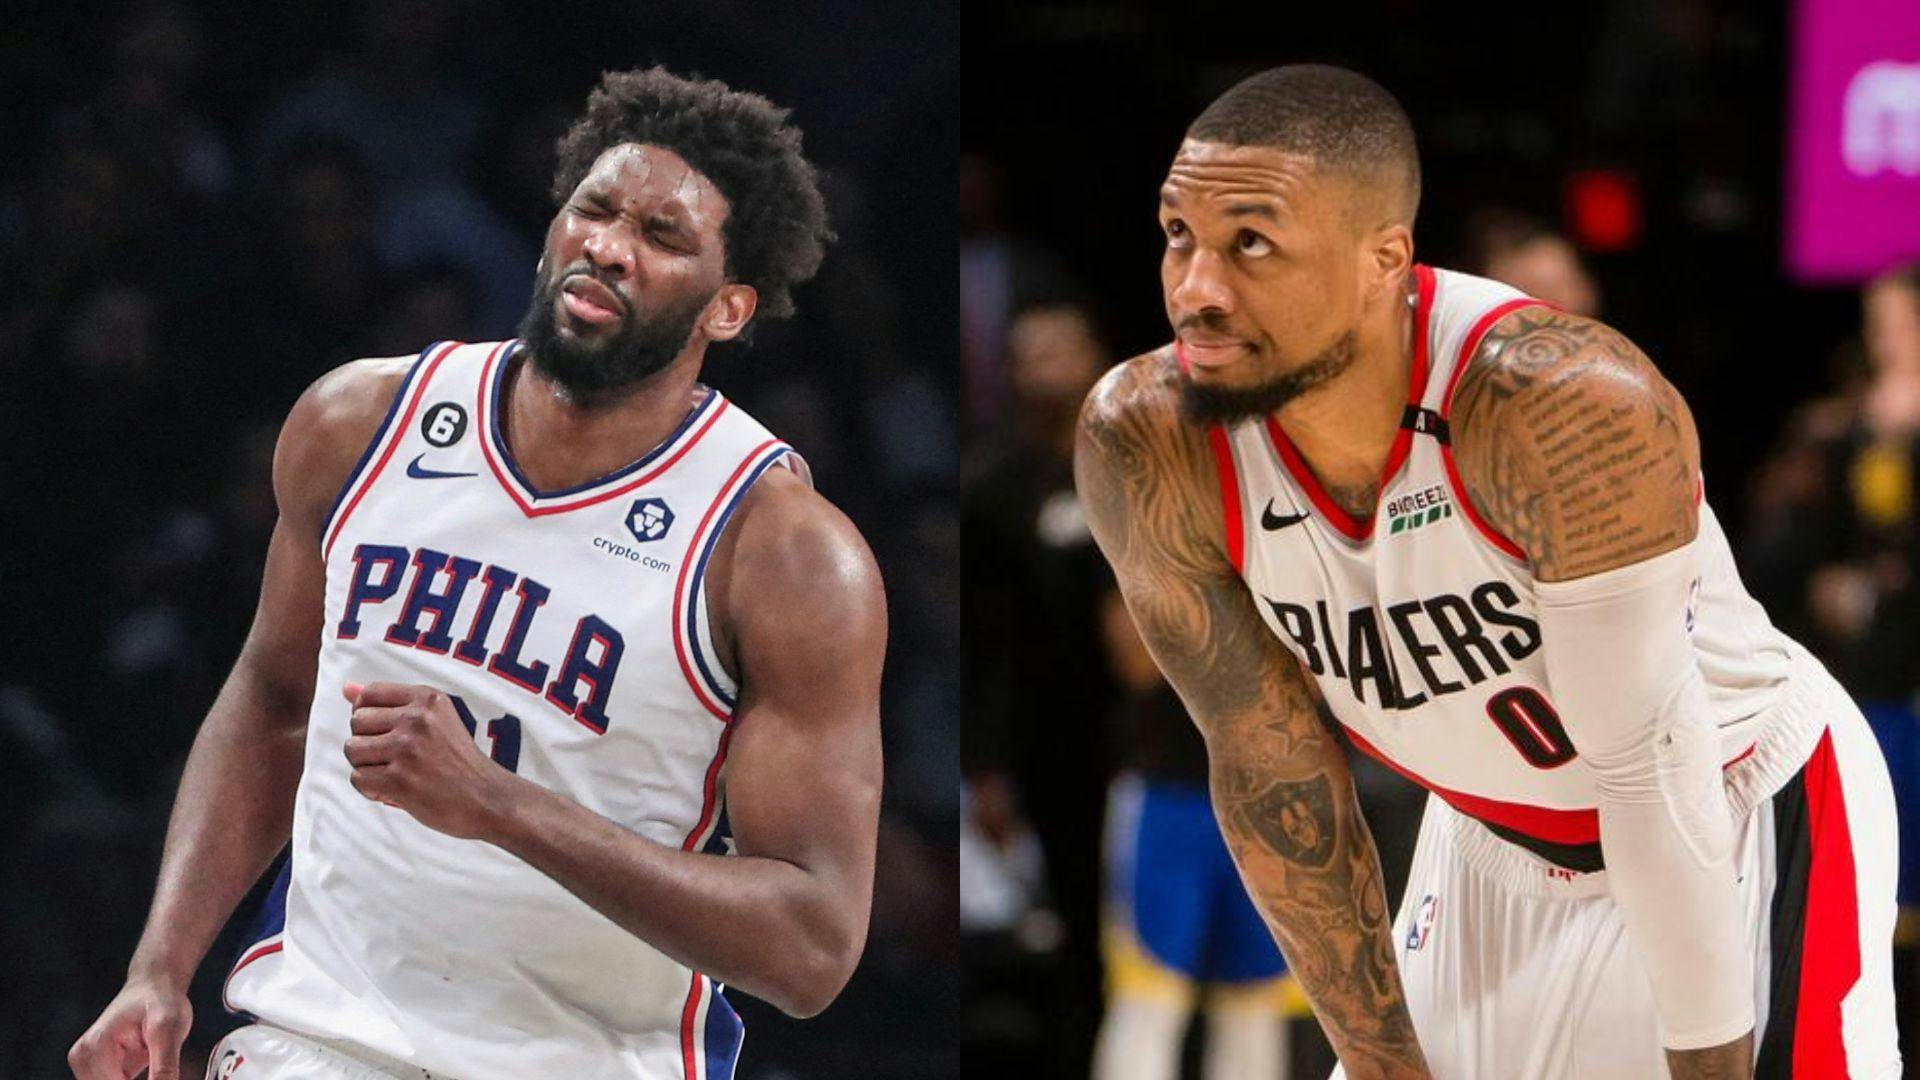 Damian Lillard reacts to Joel Embiid seemingly throwing his teammates under the bus